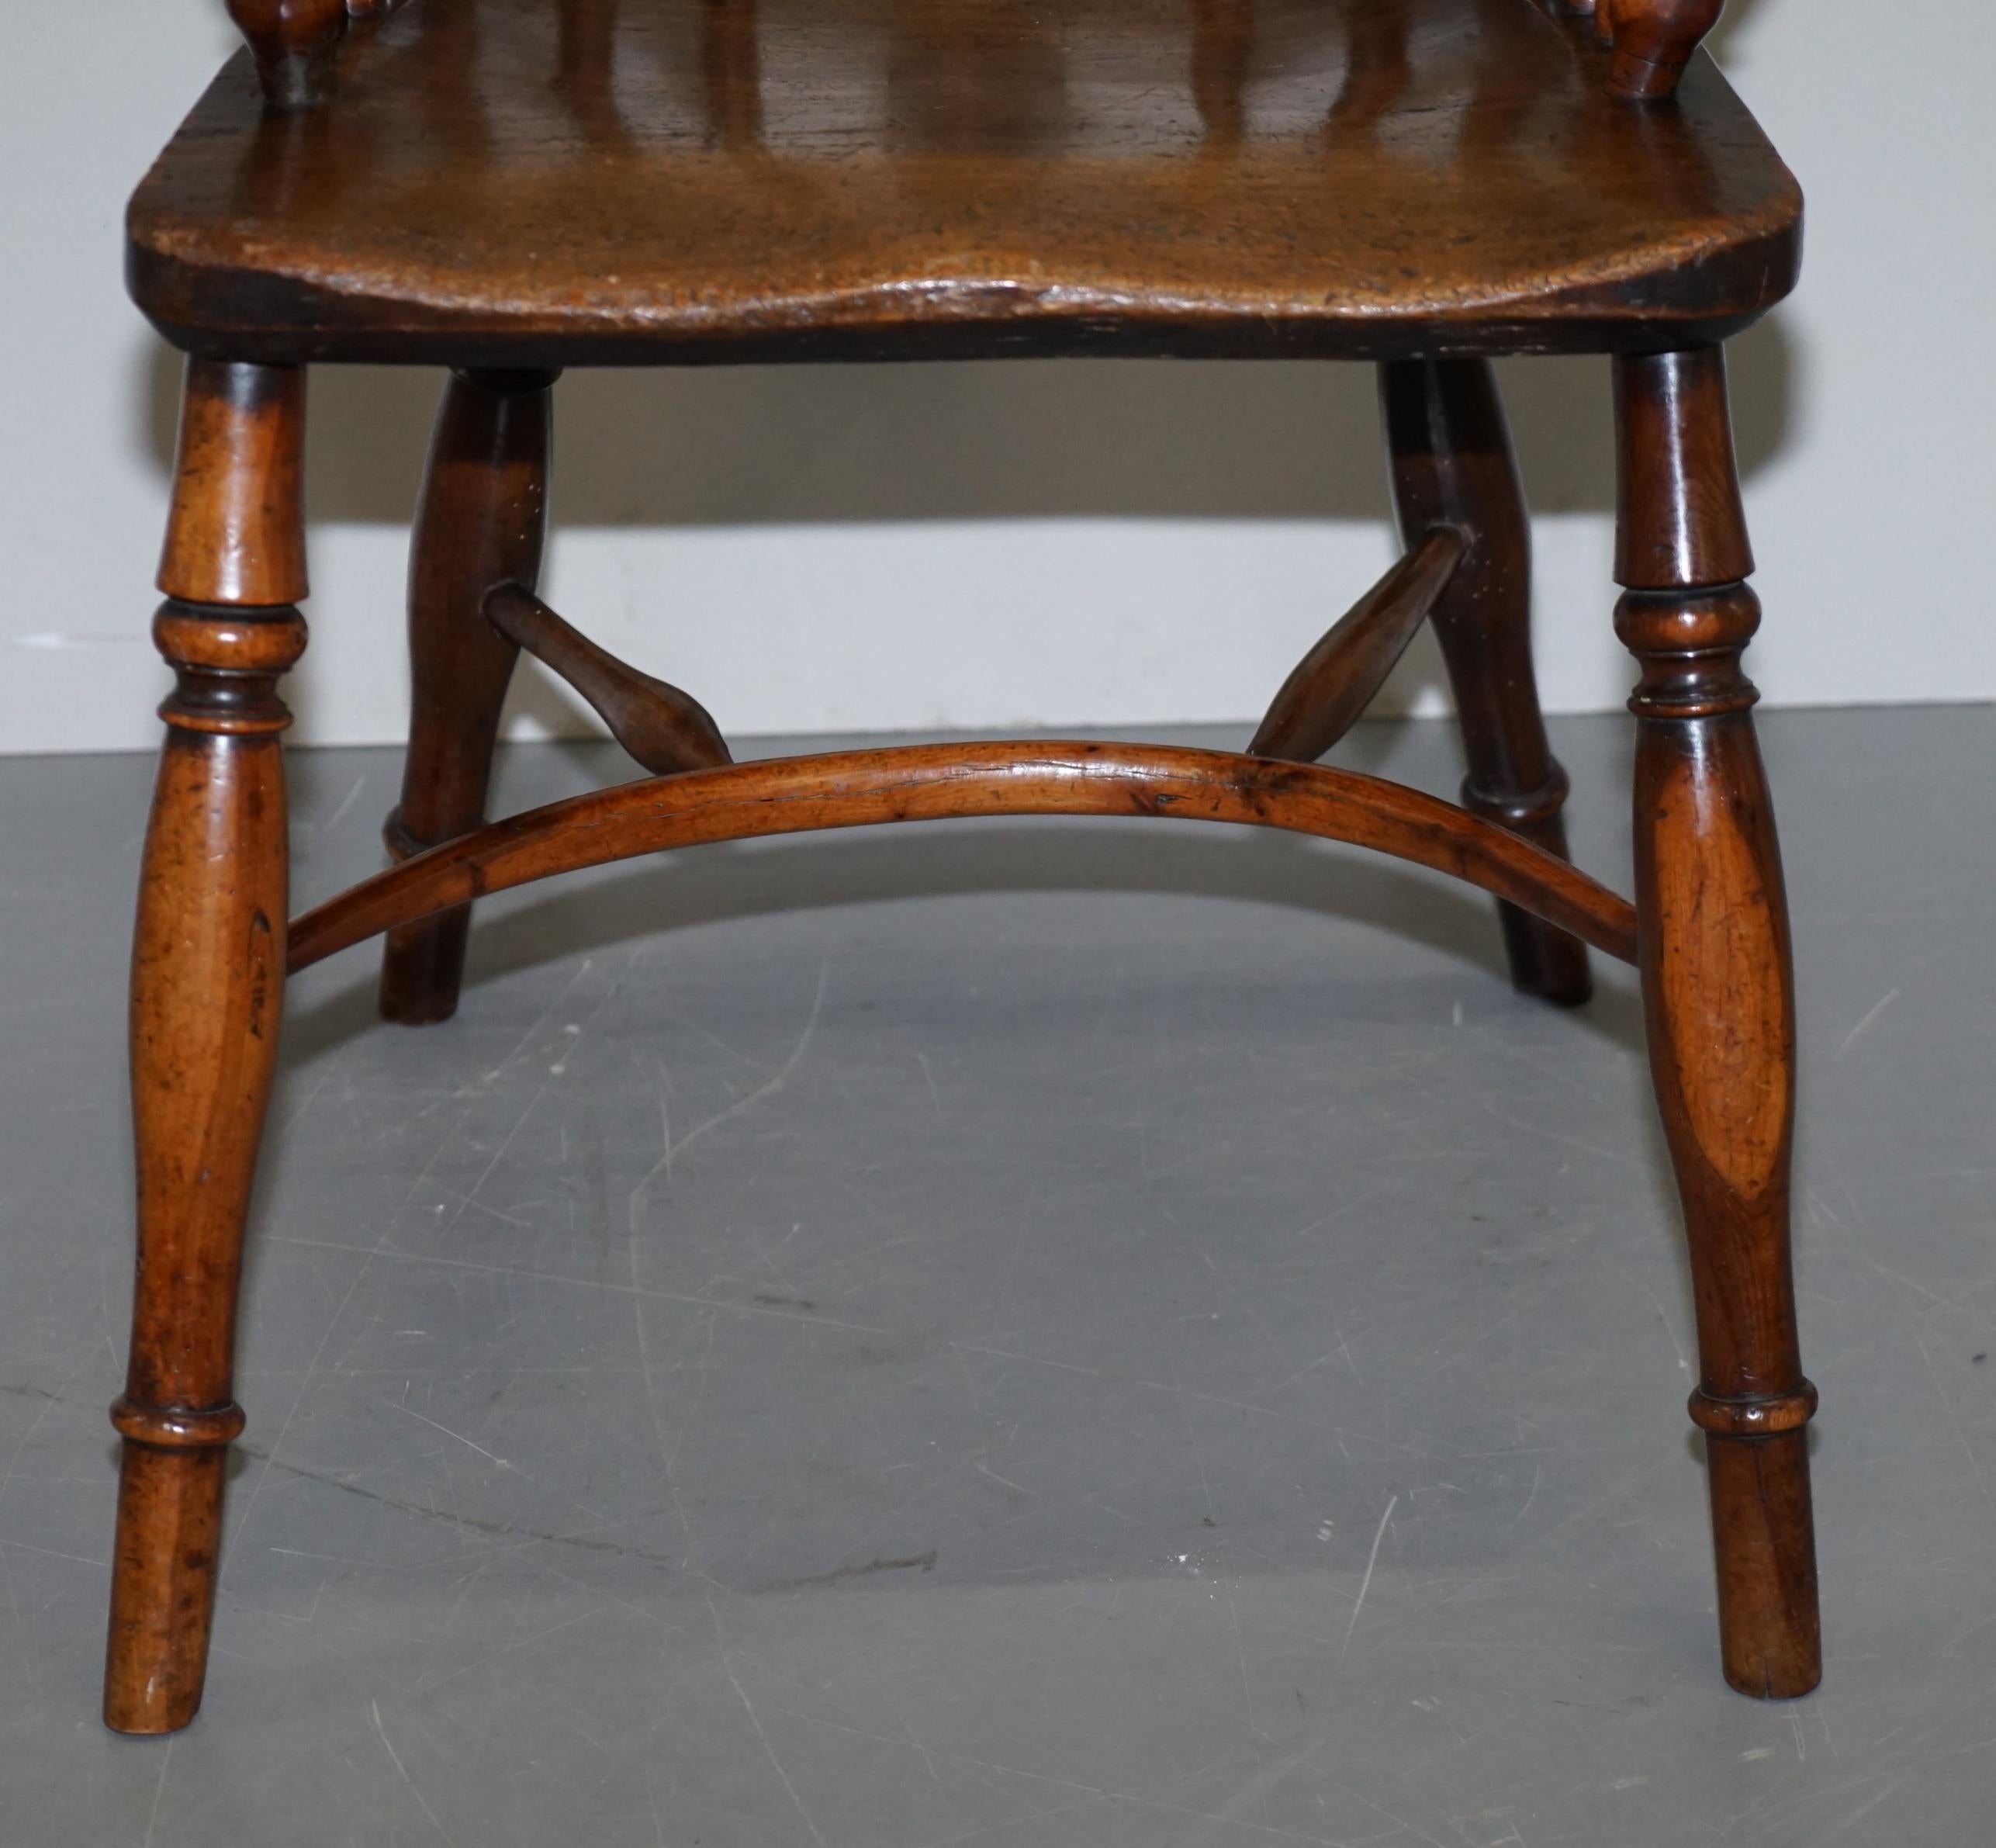 1 of 6 Burr Yew Wood Windsor Armchairs circa 1860 English Countryhouse Furniture For Sale 4